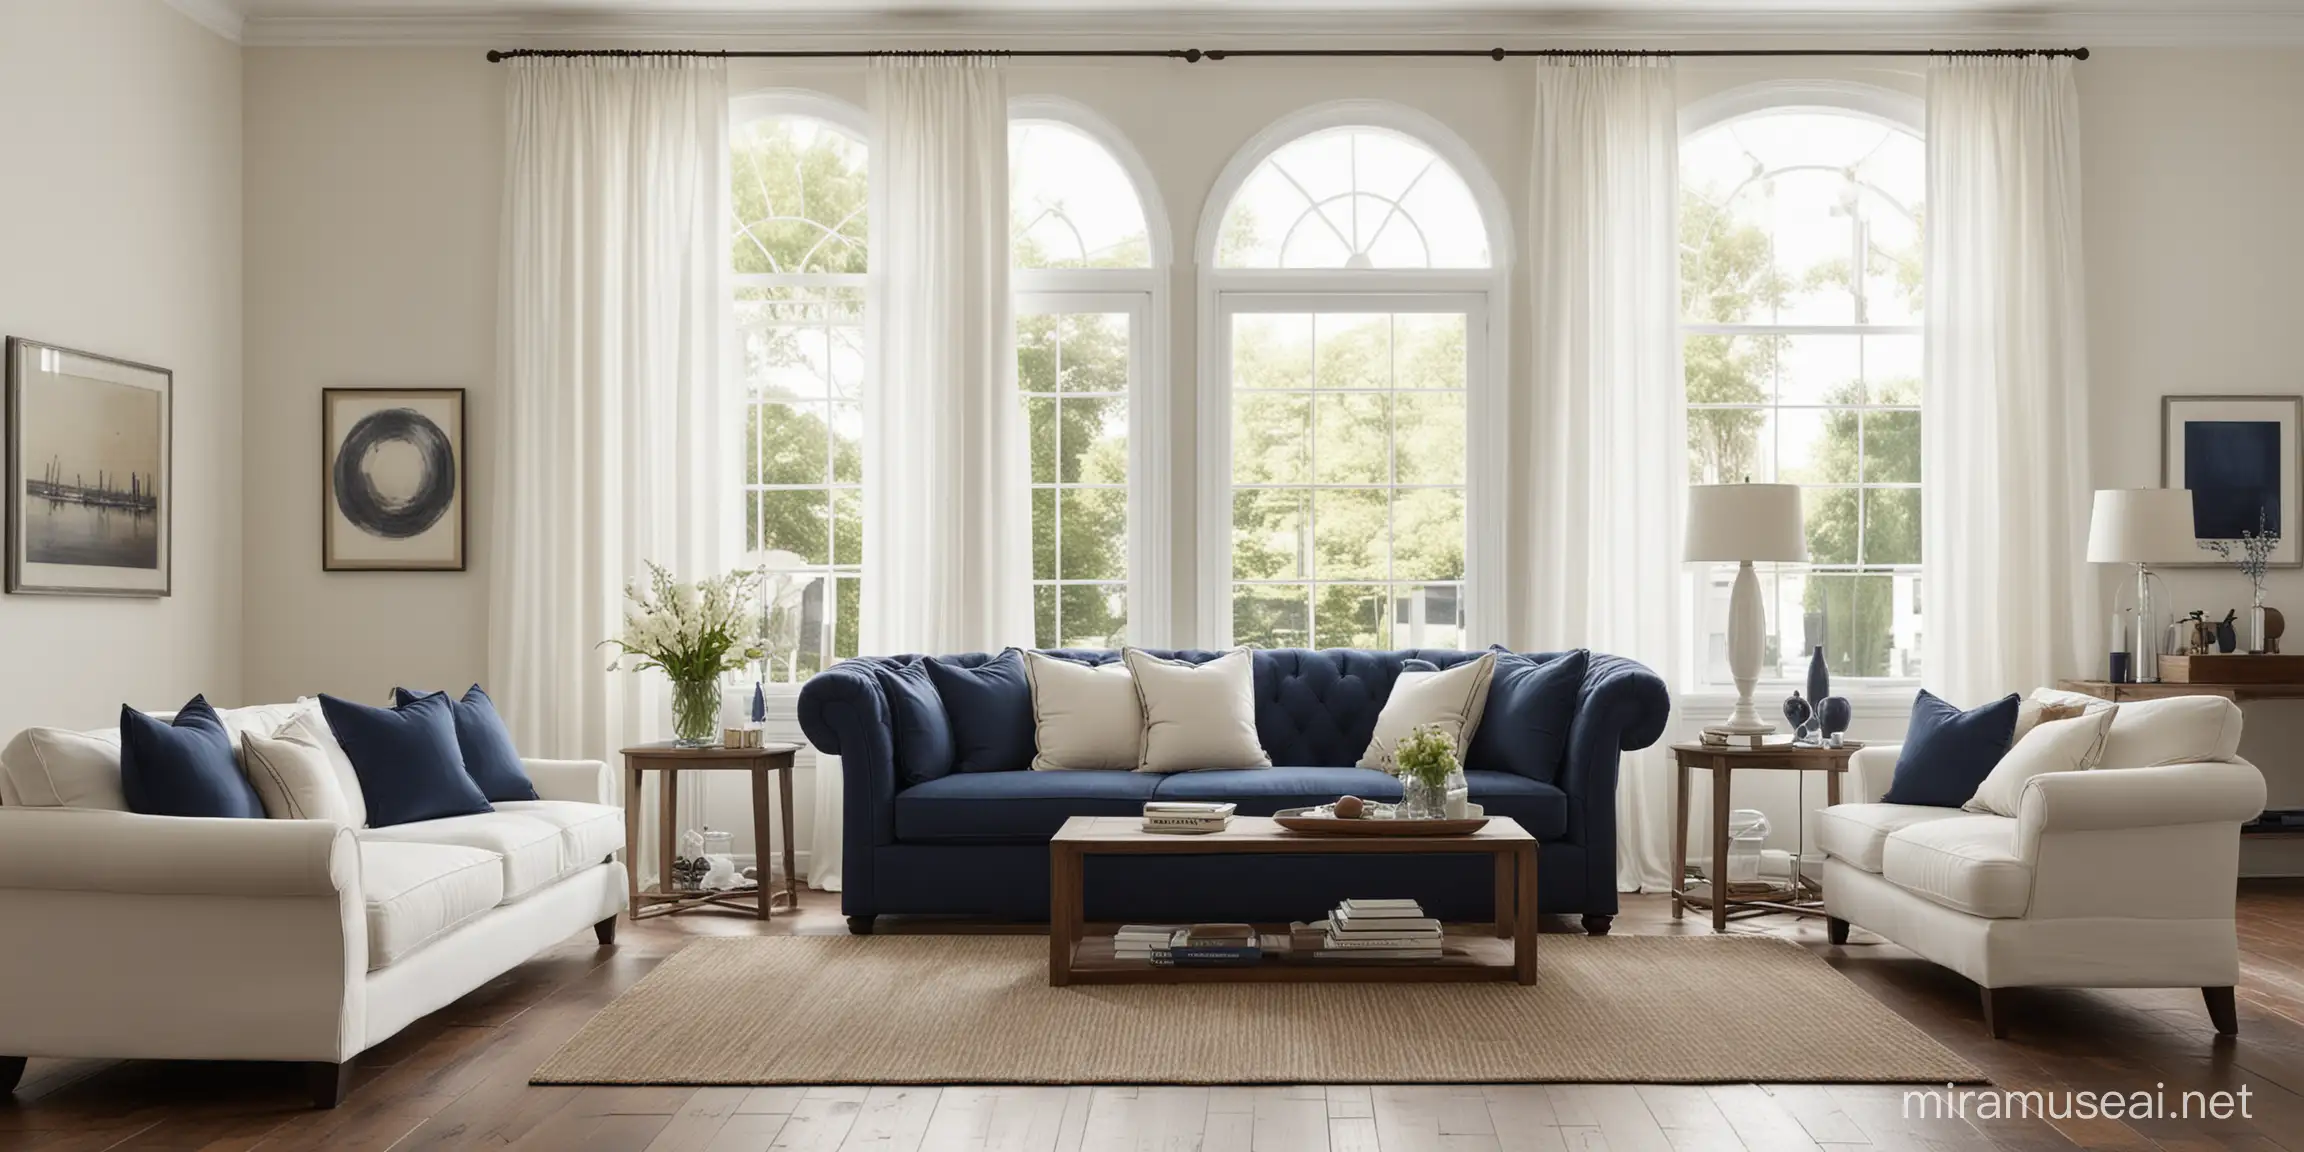 Both Dark blue and white sofas on chocolate brown wooden floor and white walls in a living room setting with a window